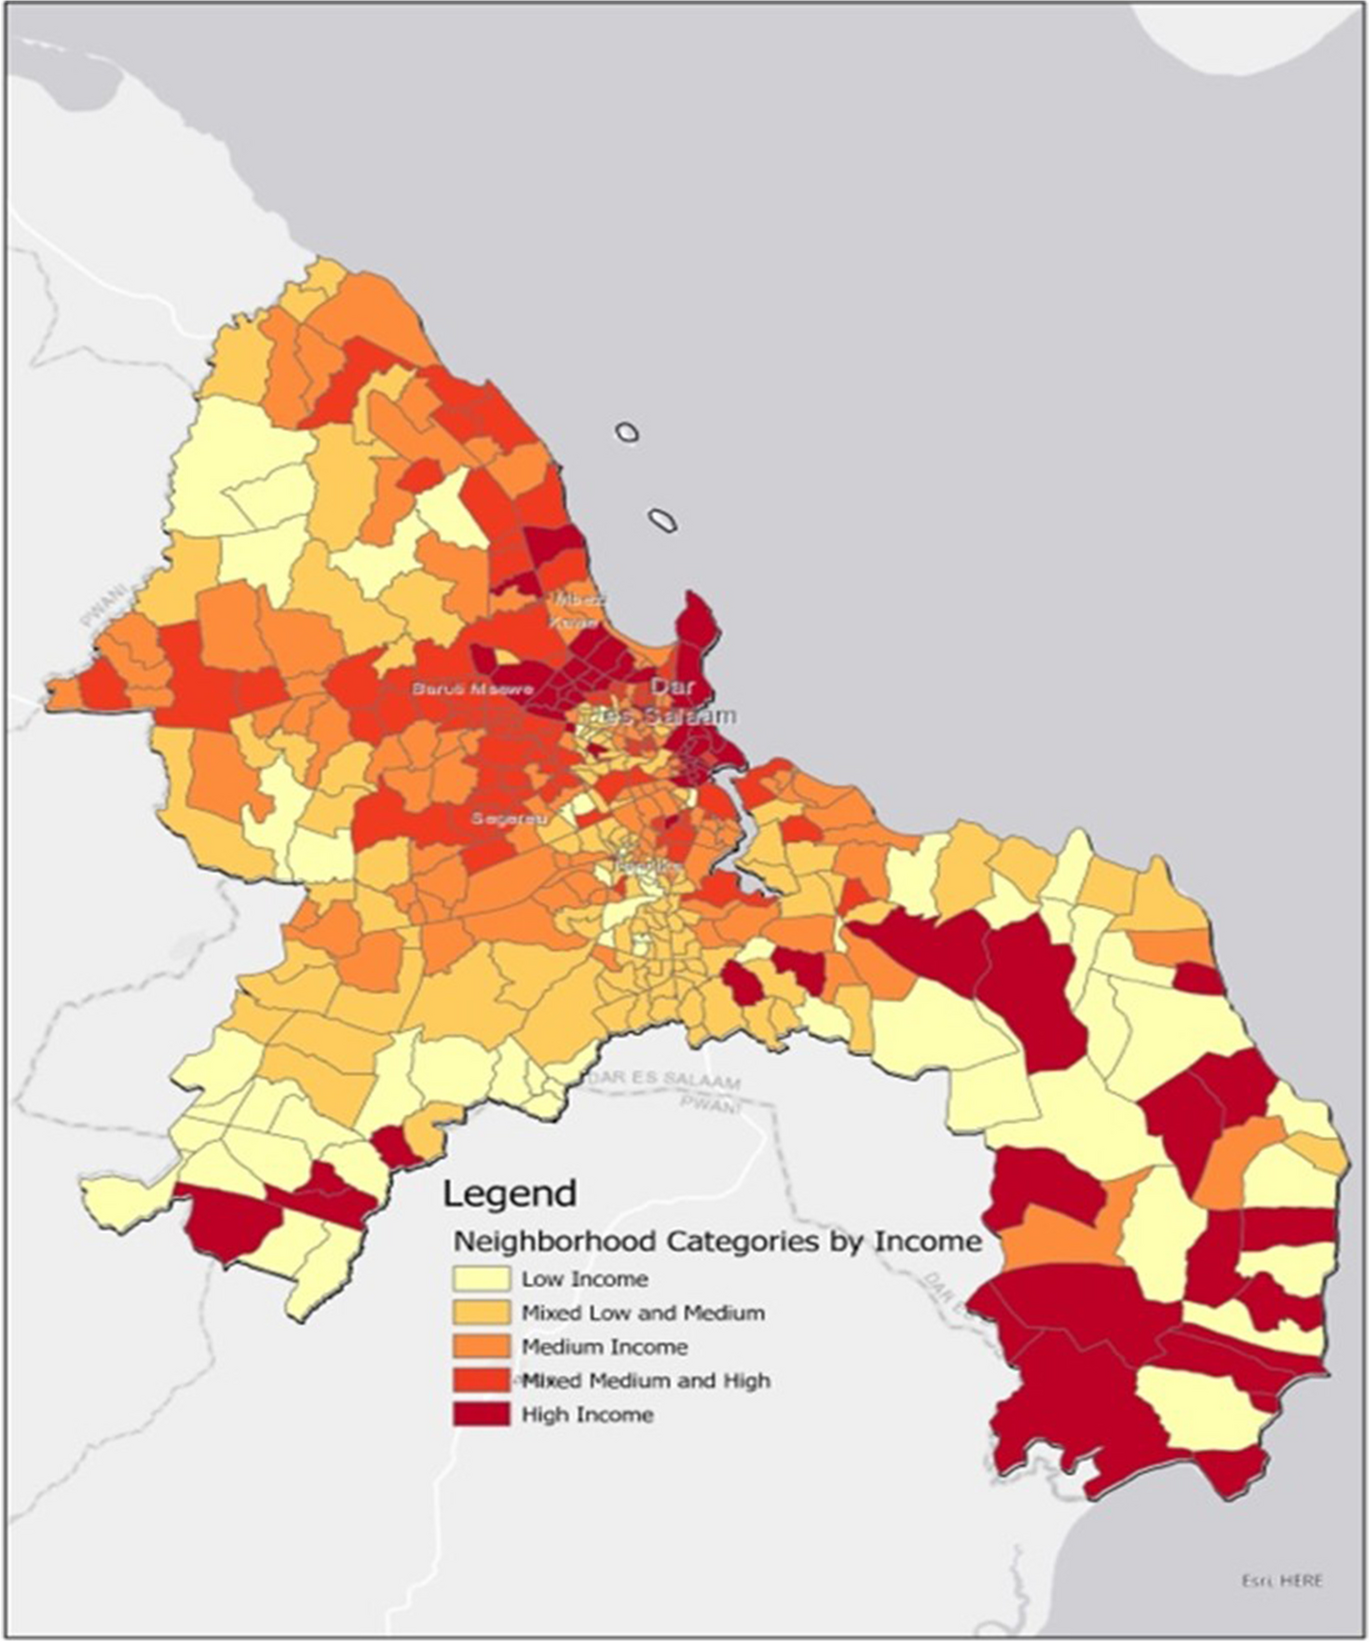 High Child Mortality and Interventions Coverage in the City of Dar es Salaam, Tanzania: Are the Poorest Paying an Urban Penalty?